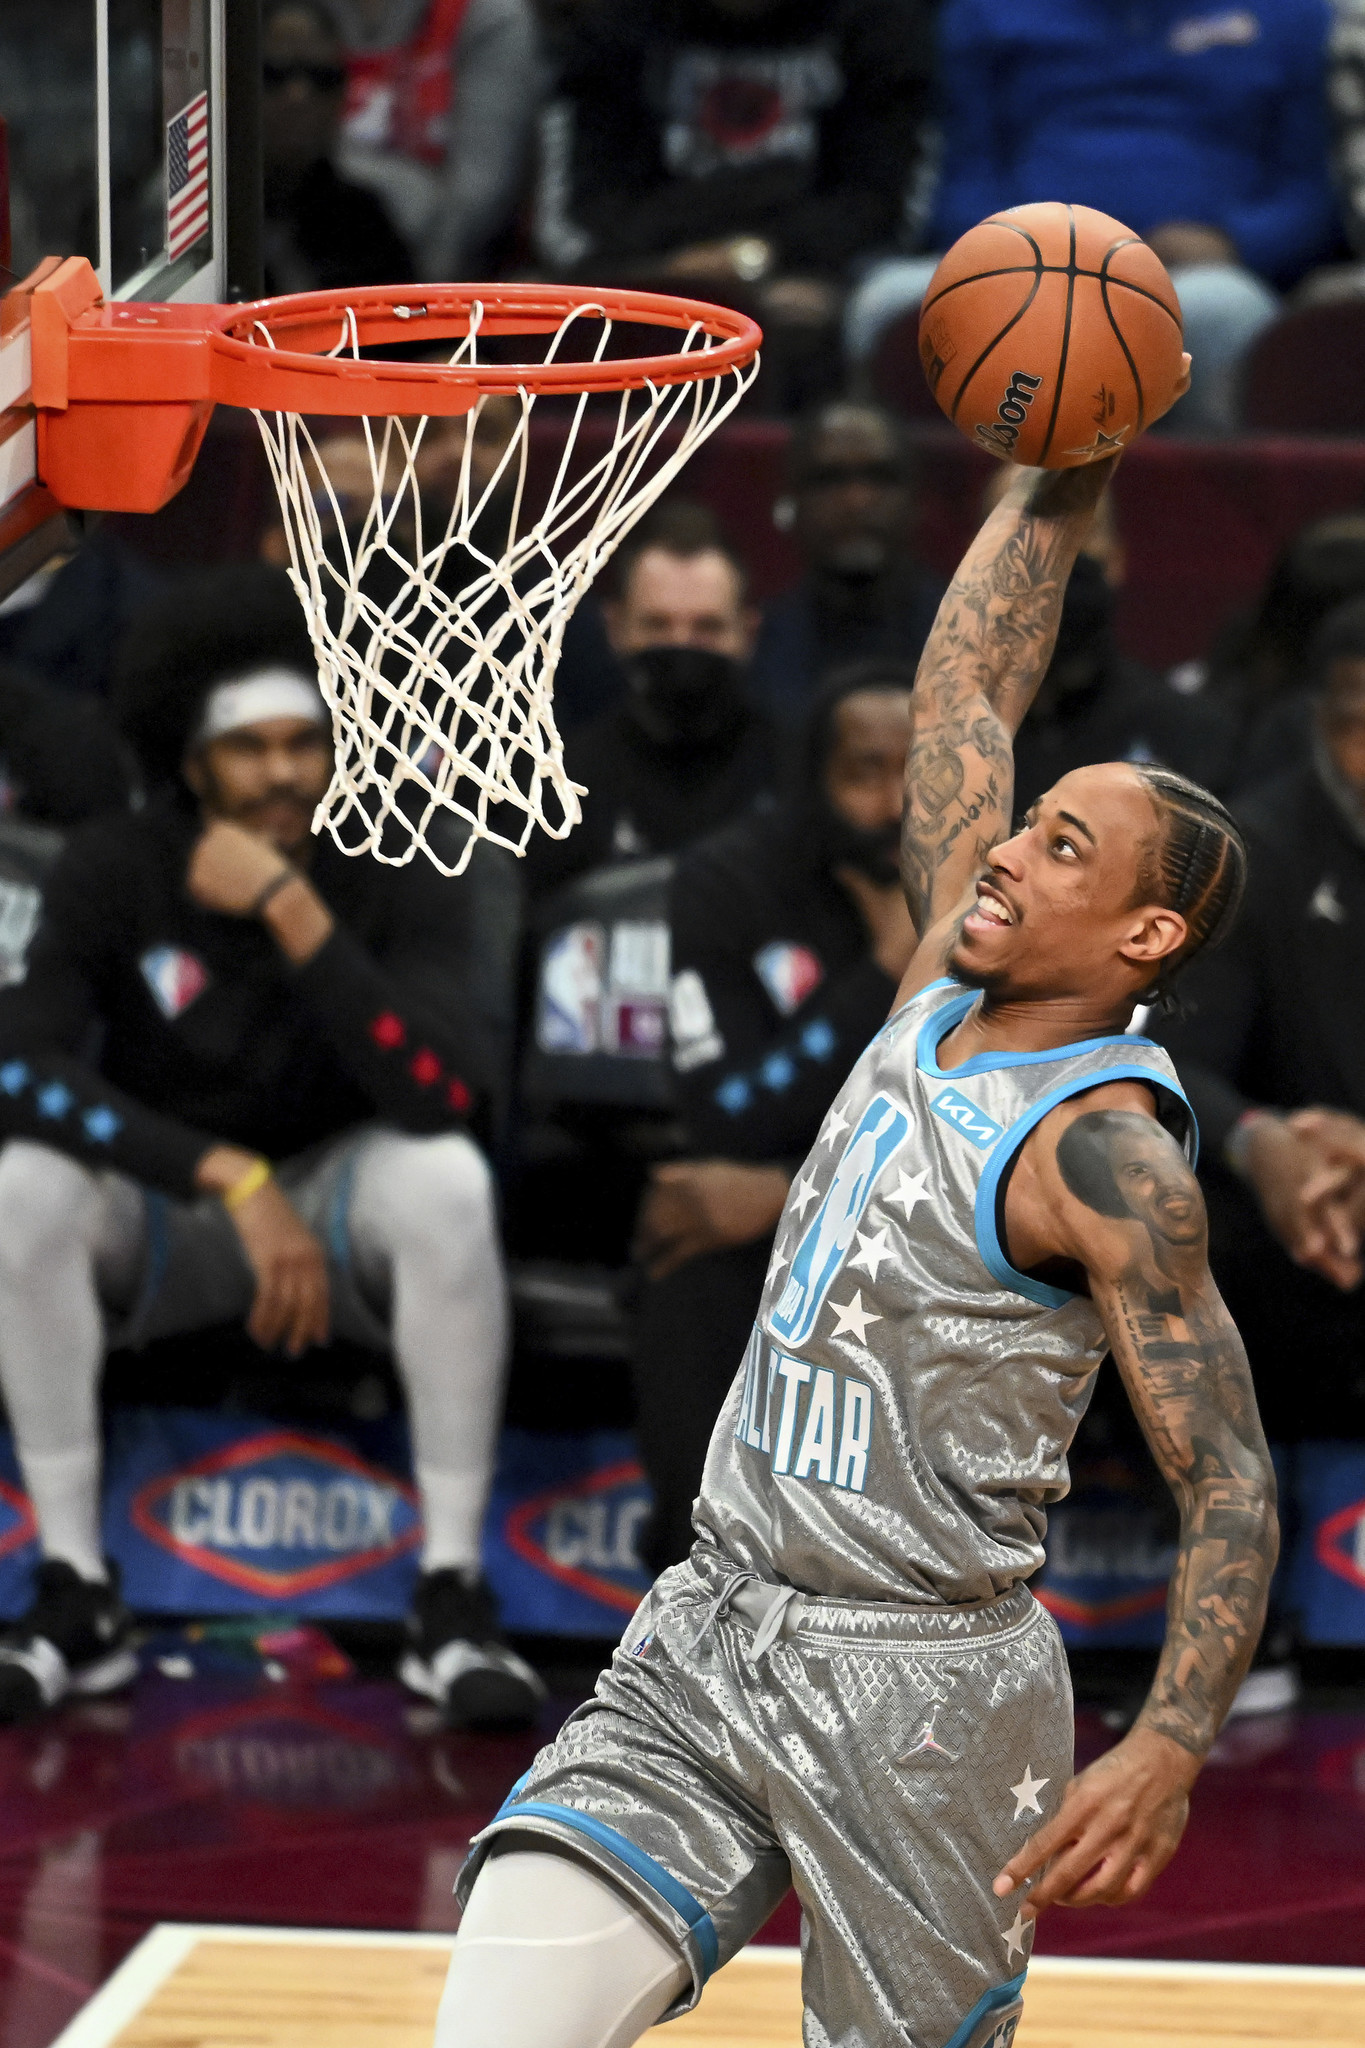 NBA All-Star Game fixes secondary to fixing perception of league